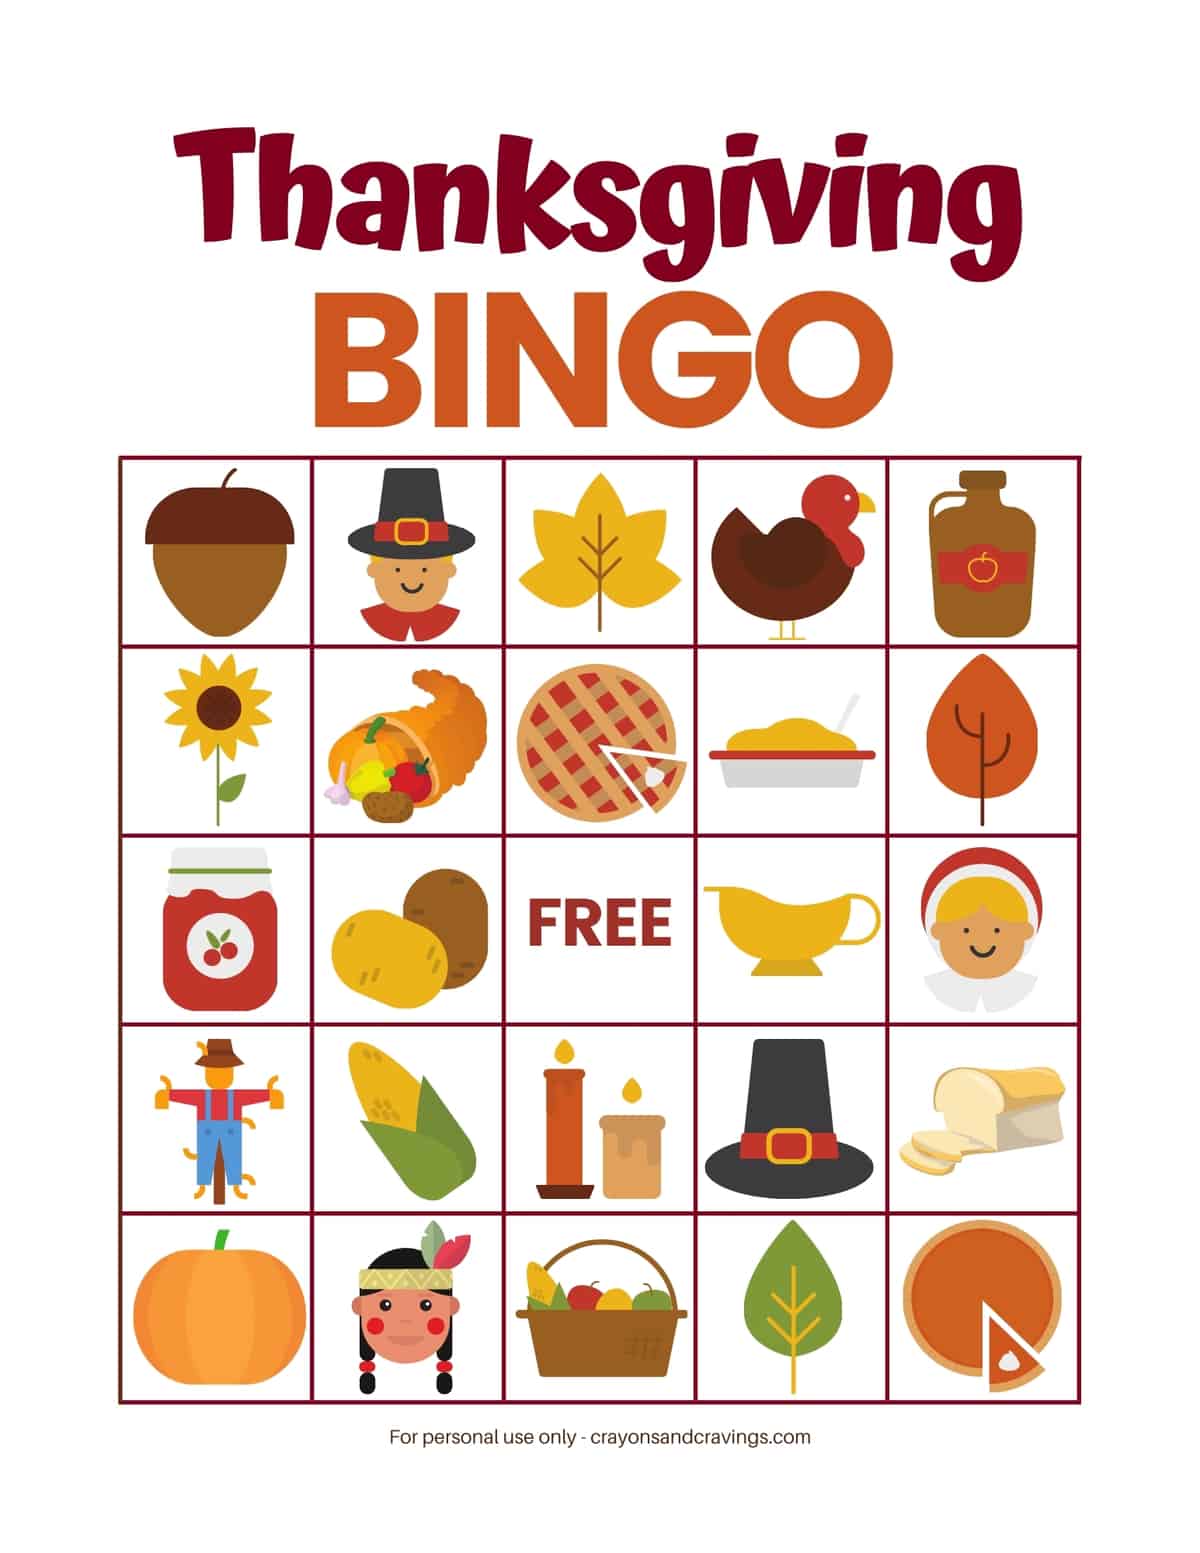 Thanksgiving Bingo card - for personal use only.